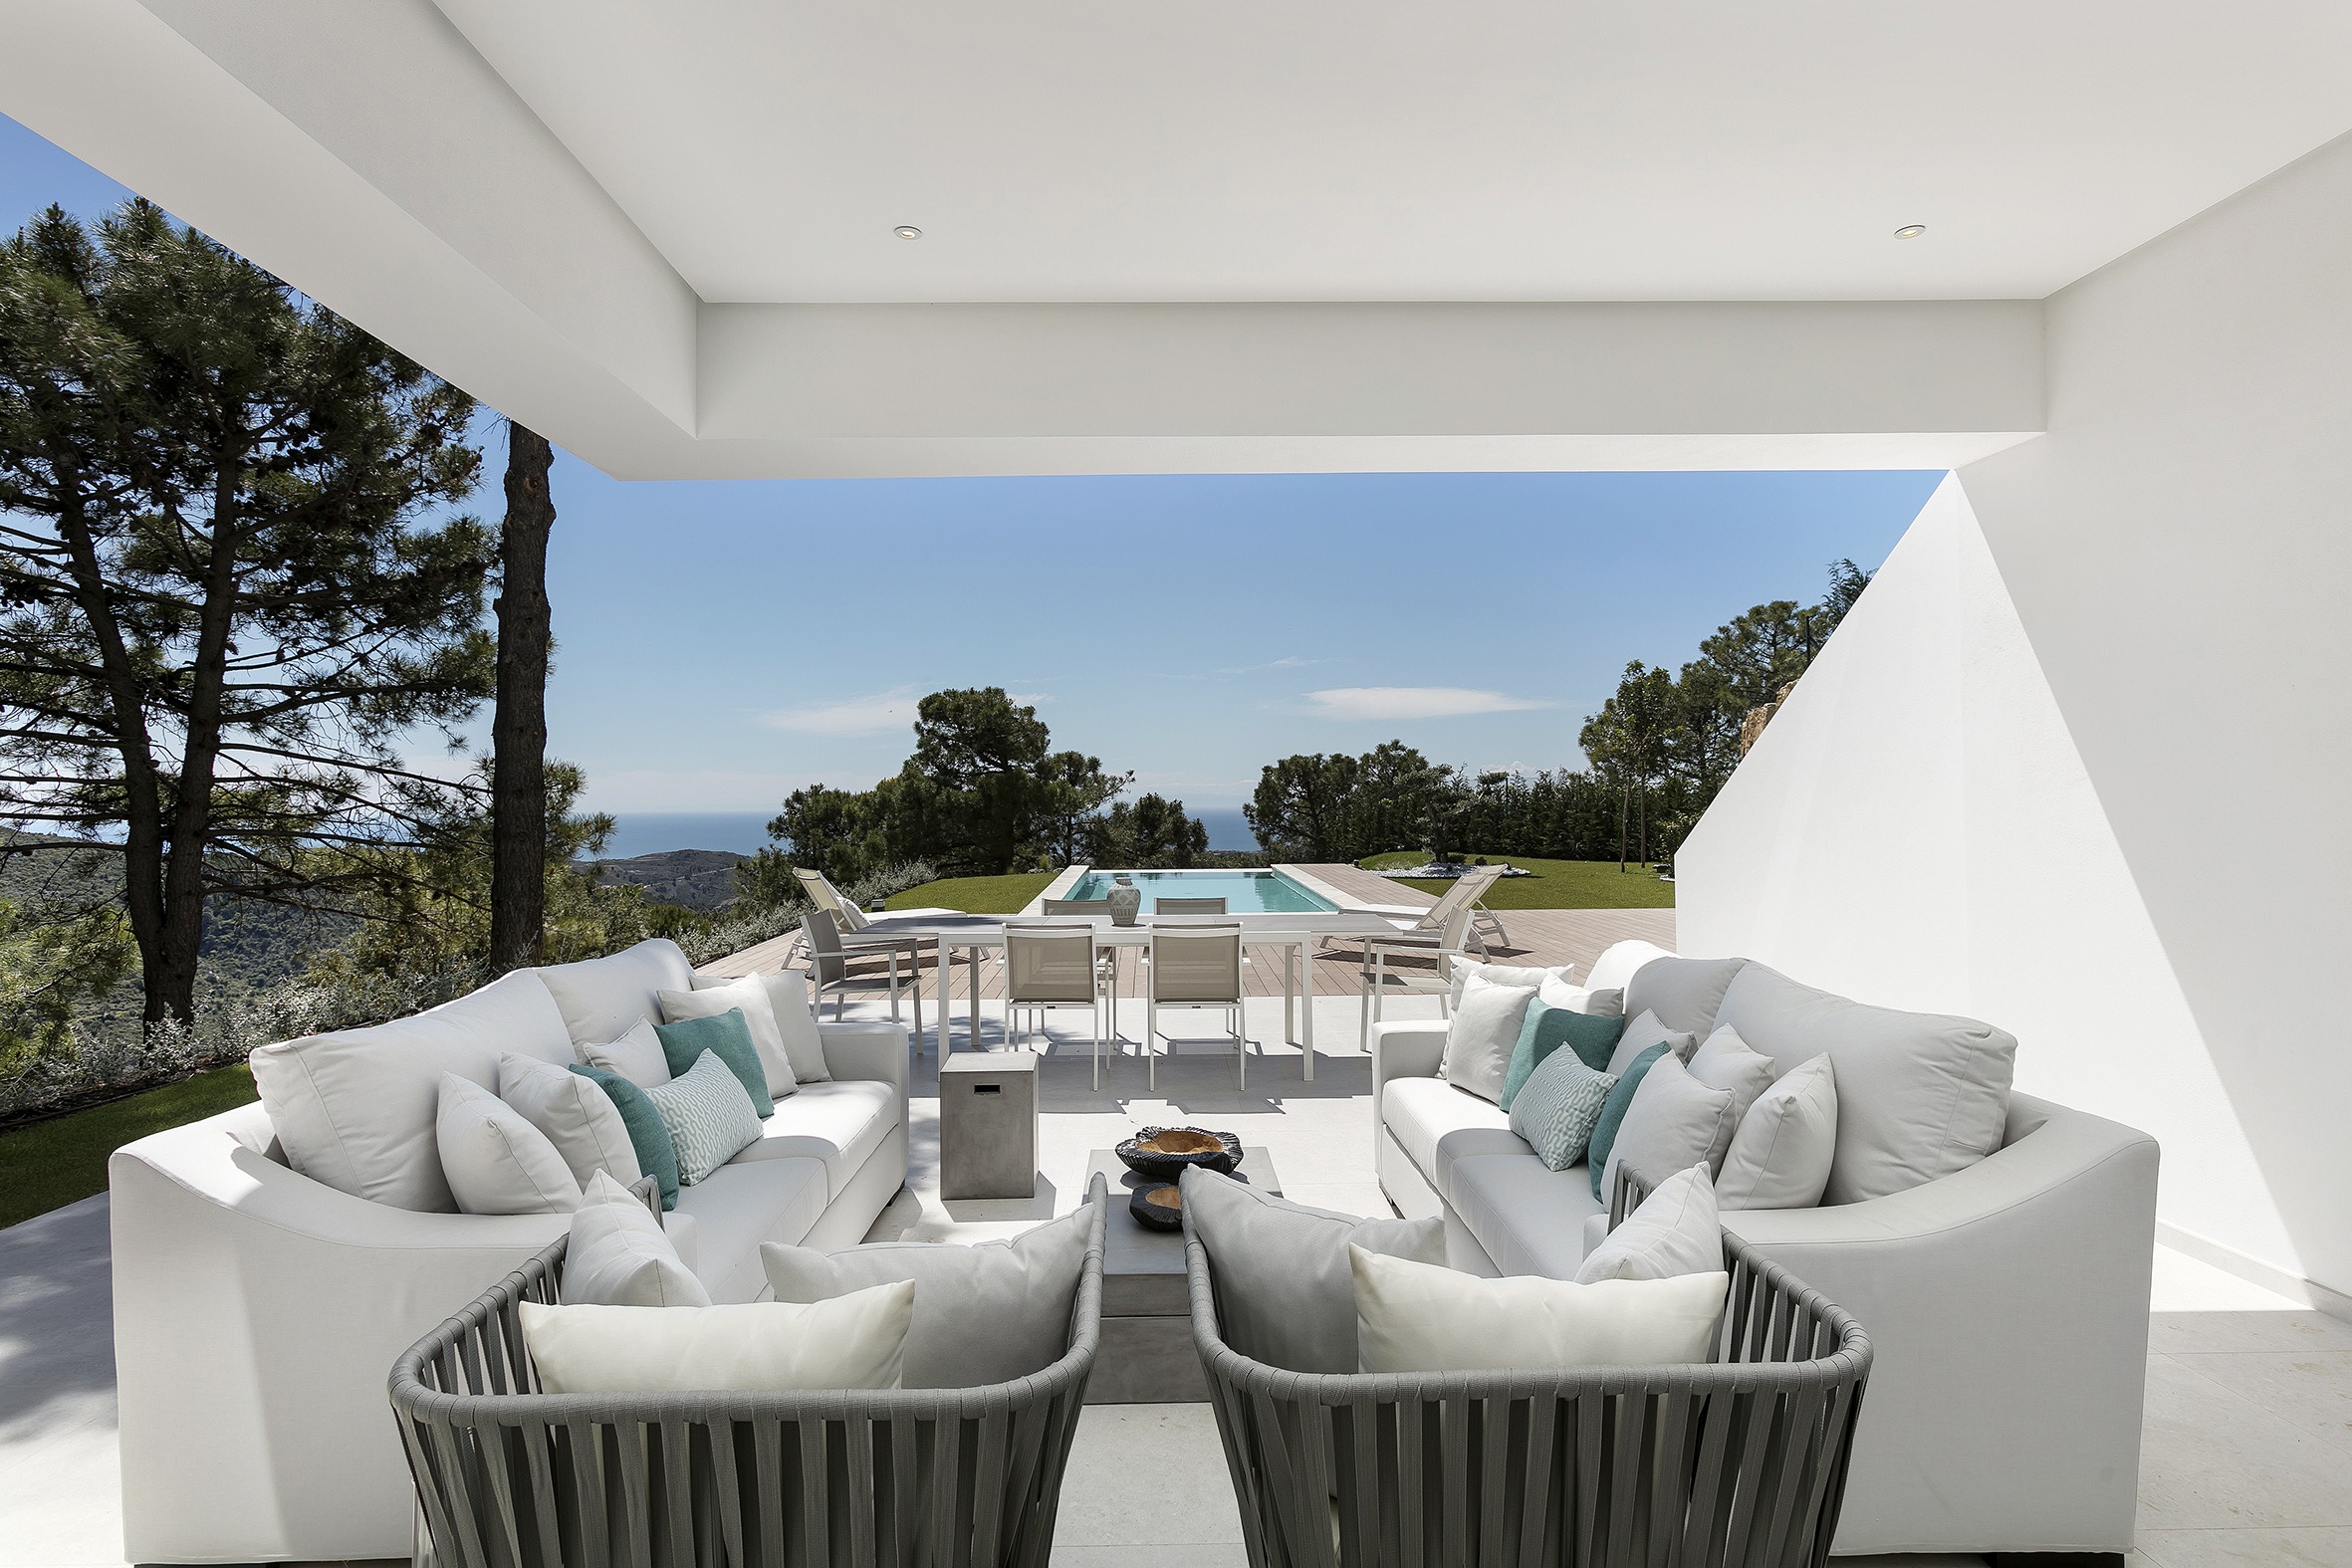 Exterior terrace design white and and grey colors , pool and ocean view - Original Interiors